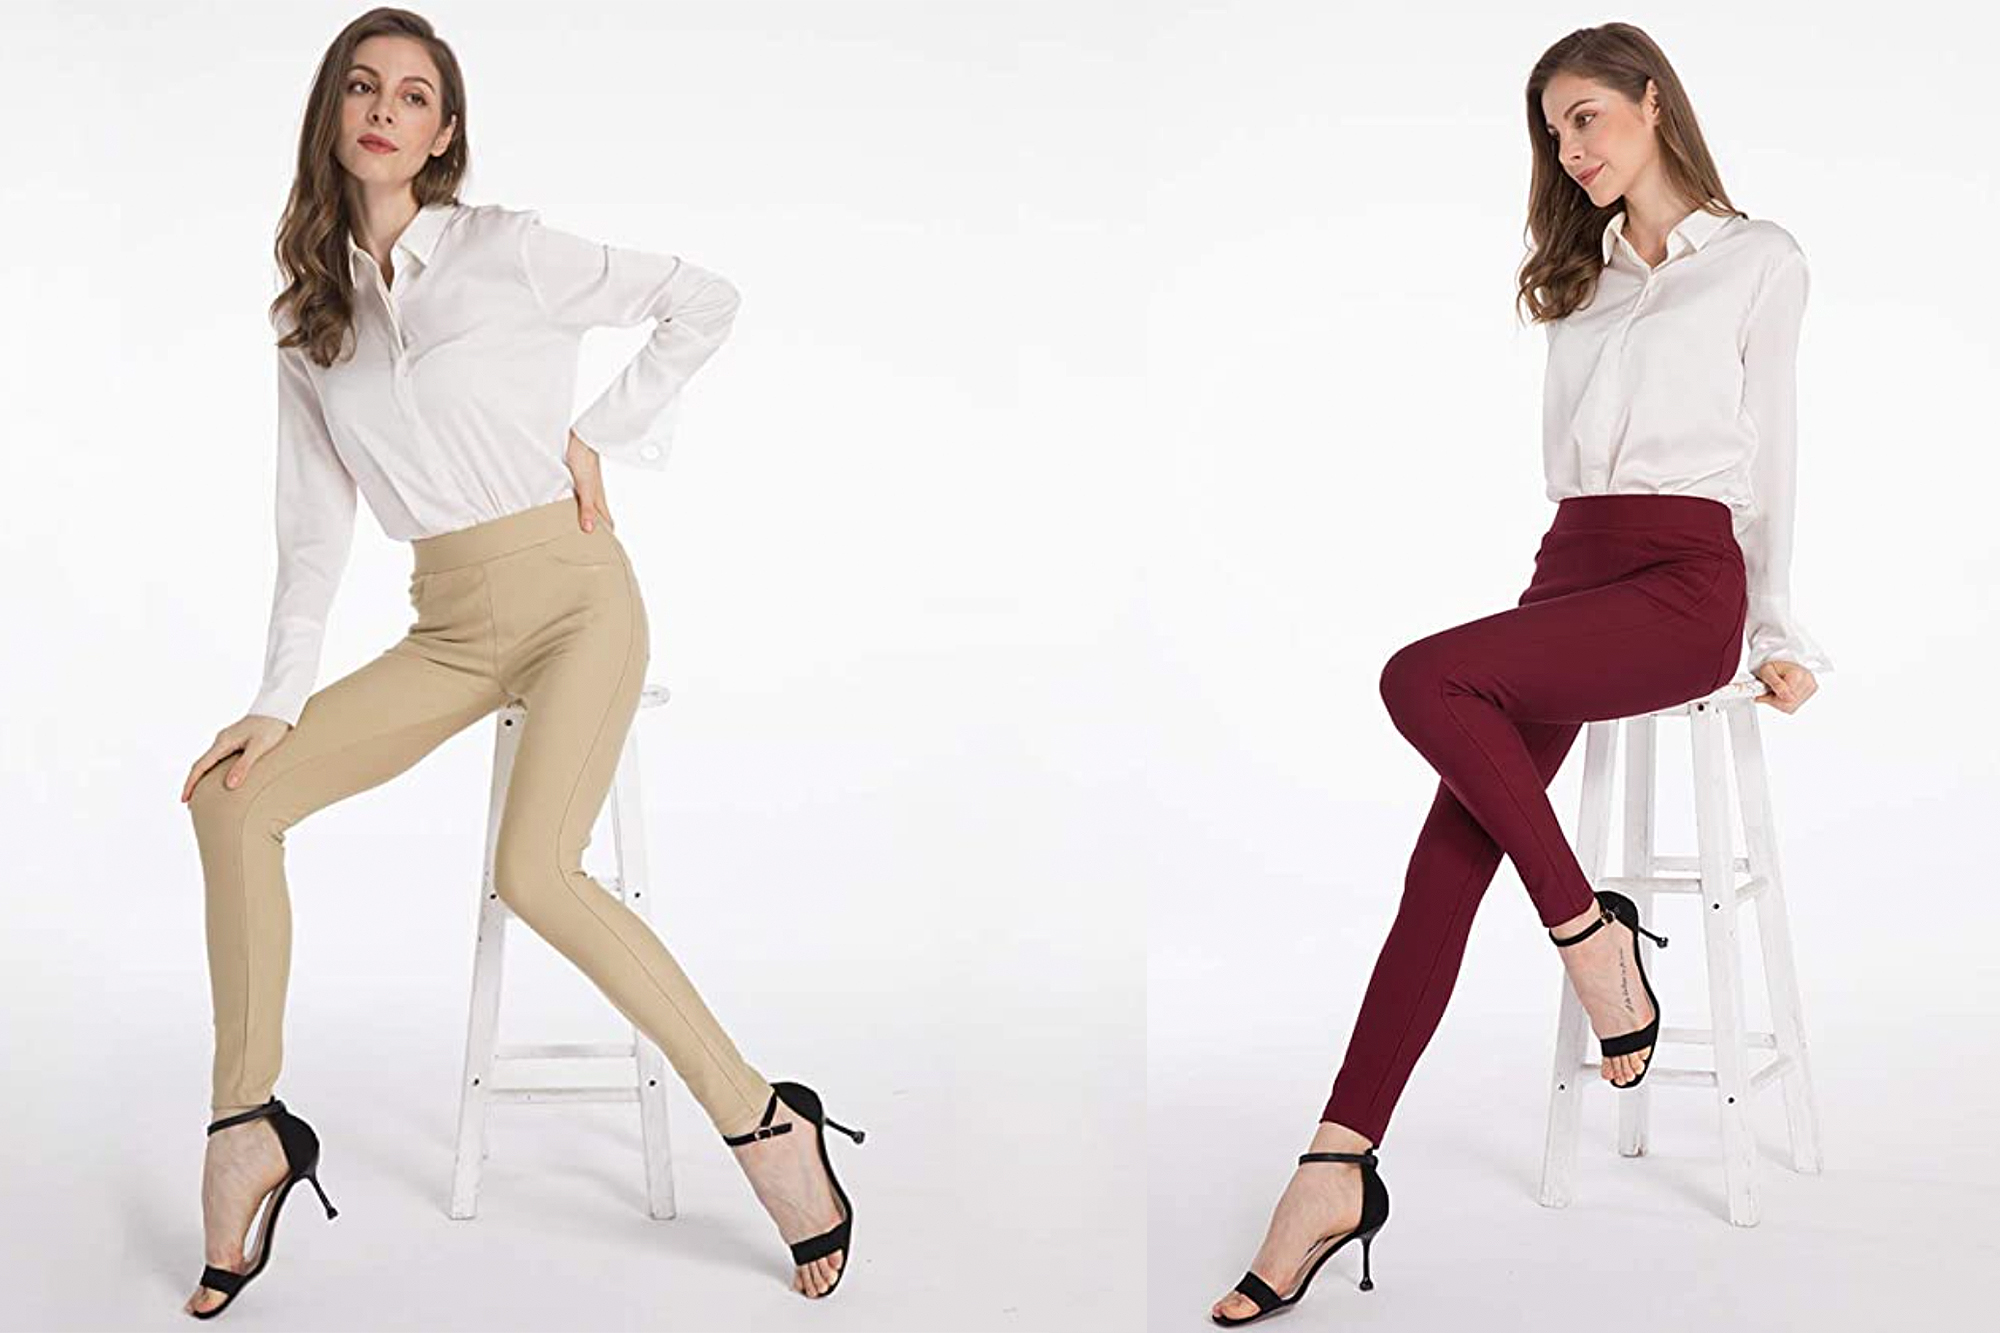  Ginasy Dress Pants Women Business Casual High Waisted Stretch  Pull Work Trousers Ankle Flare Crop Dressy Office Capris Black : Clothing,  Shoes & Jewelry